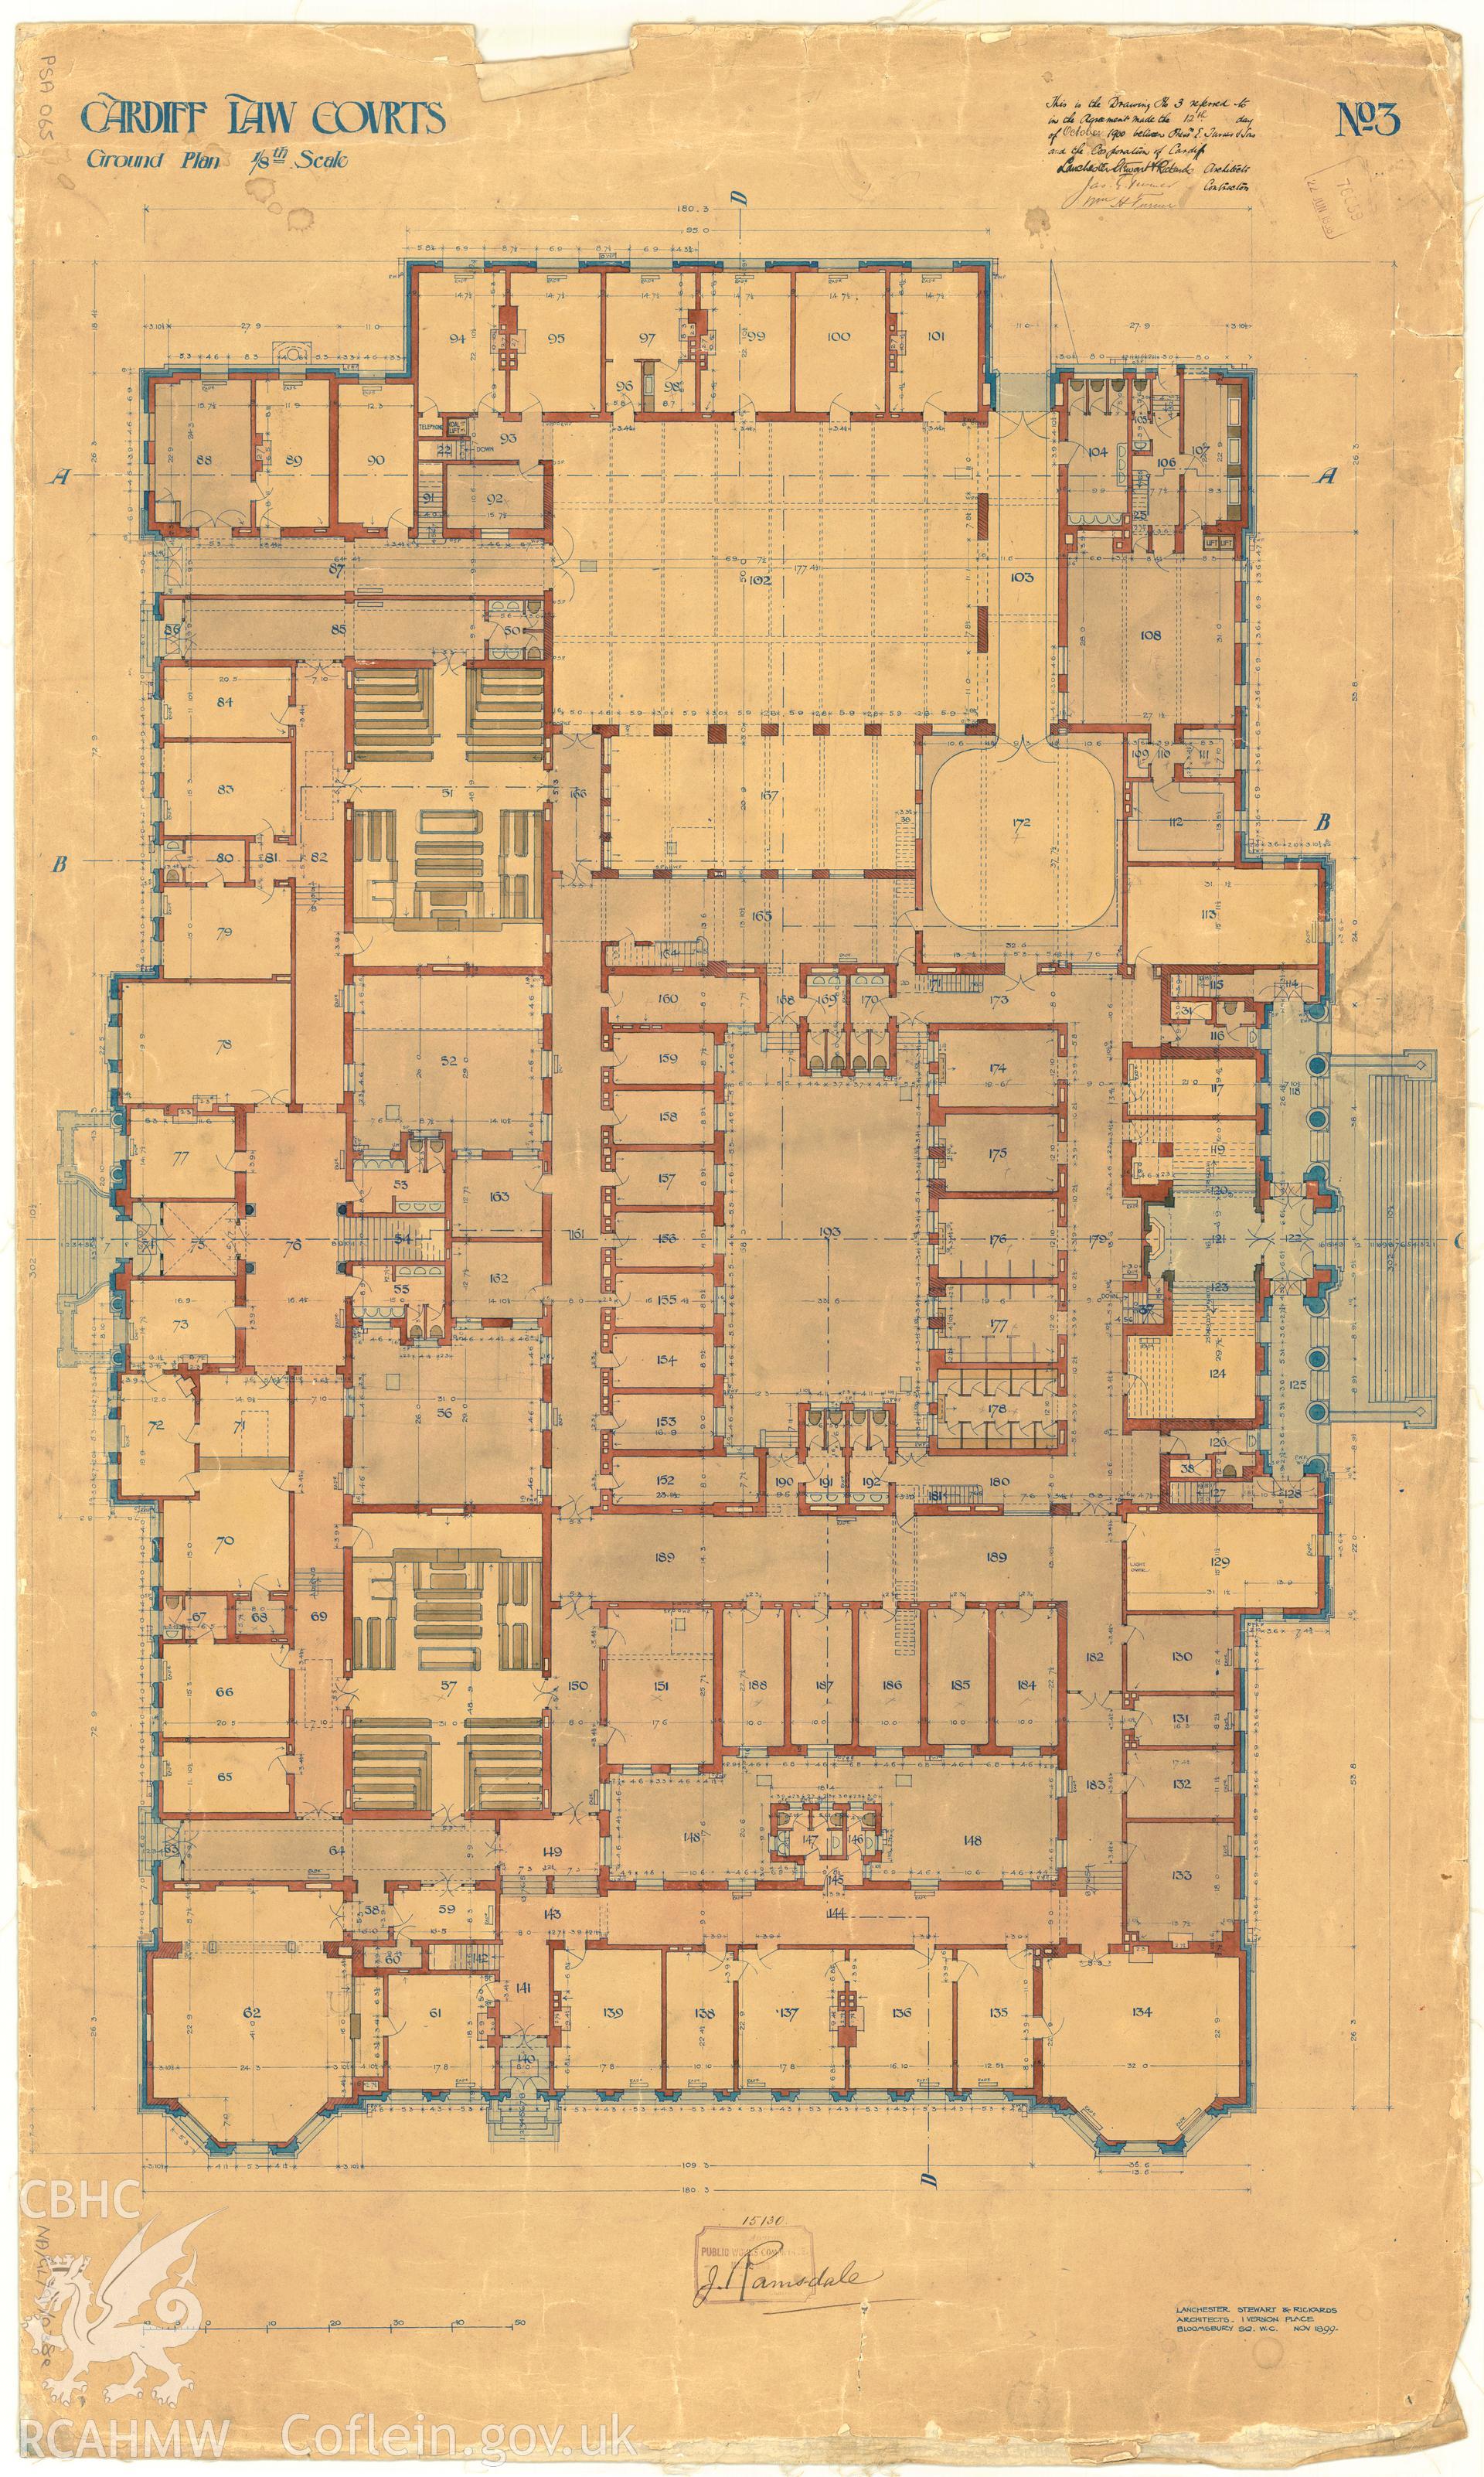 Law Court, Cathays Park, Cardiff; measured drawing showing ground floor plan, produced by Lanchester Stewart and Rickards, 1899.